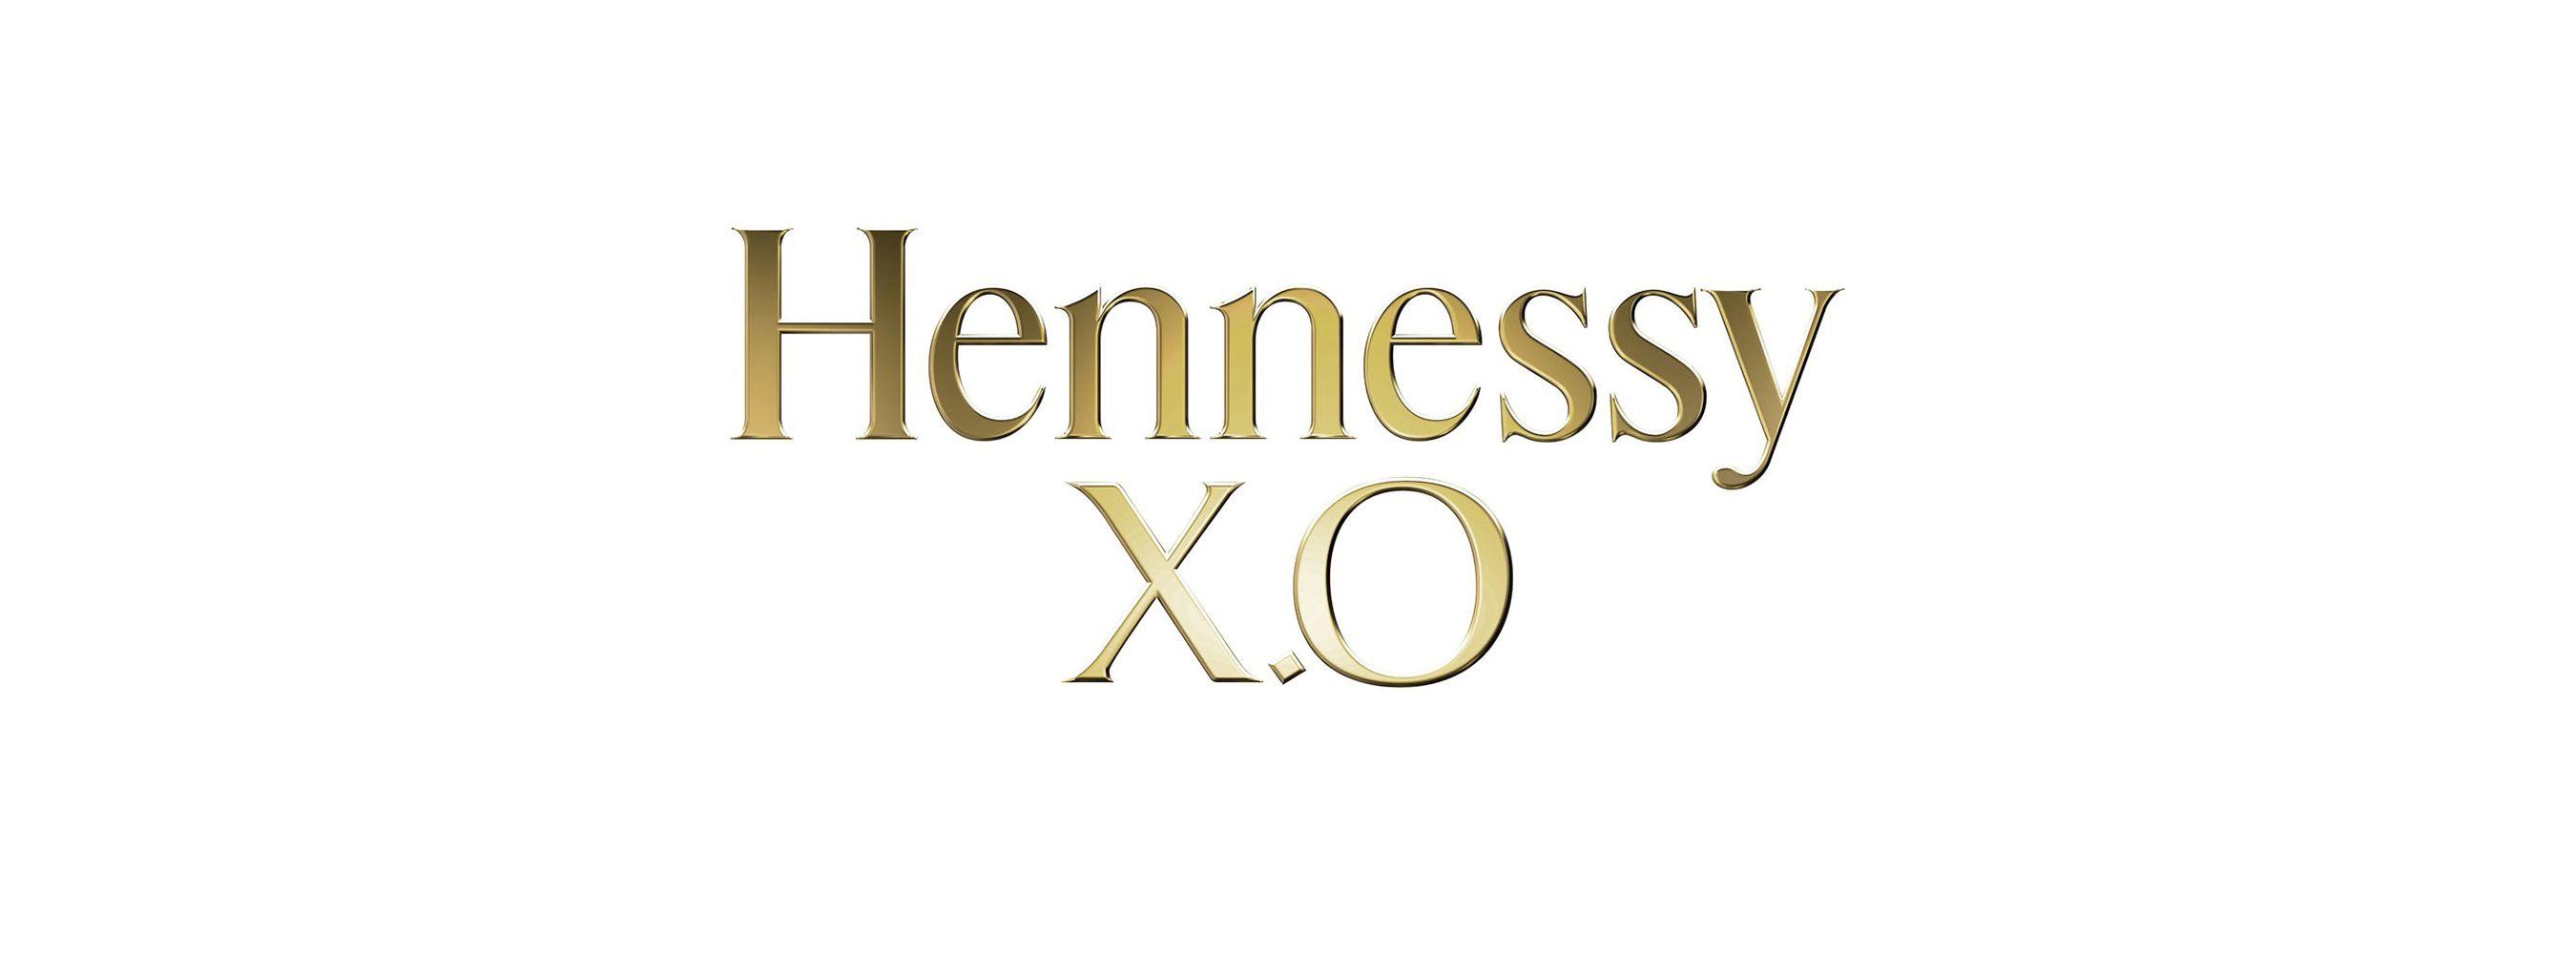 Hennessy XO Logo - Hennessy X.O Inspires Original Holiday Luxe List